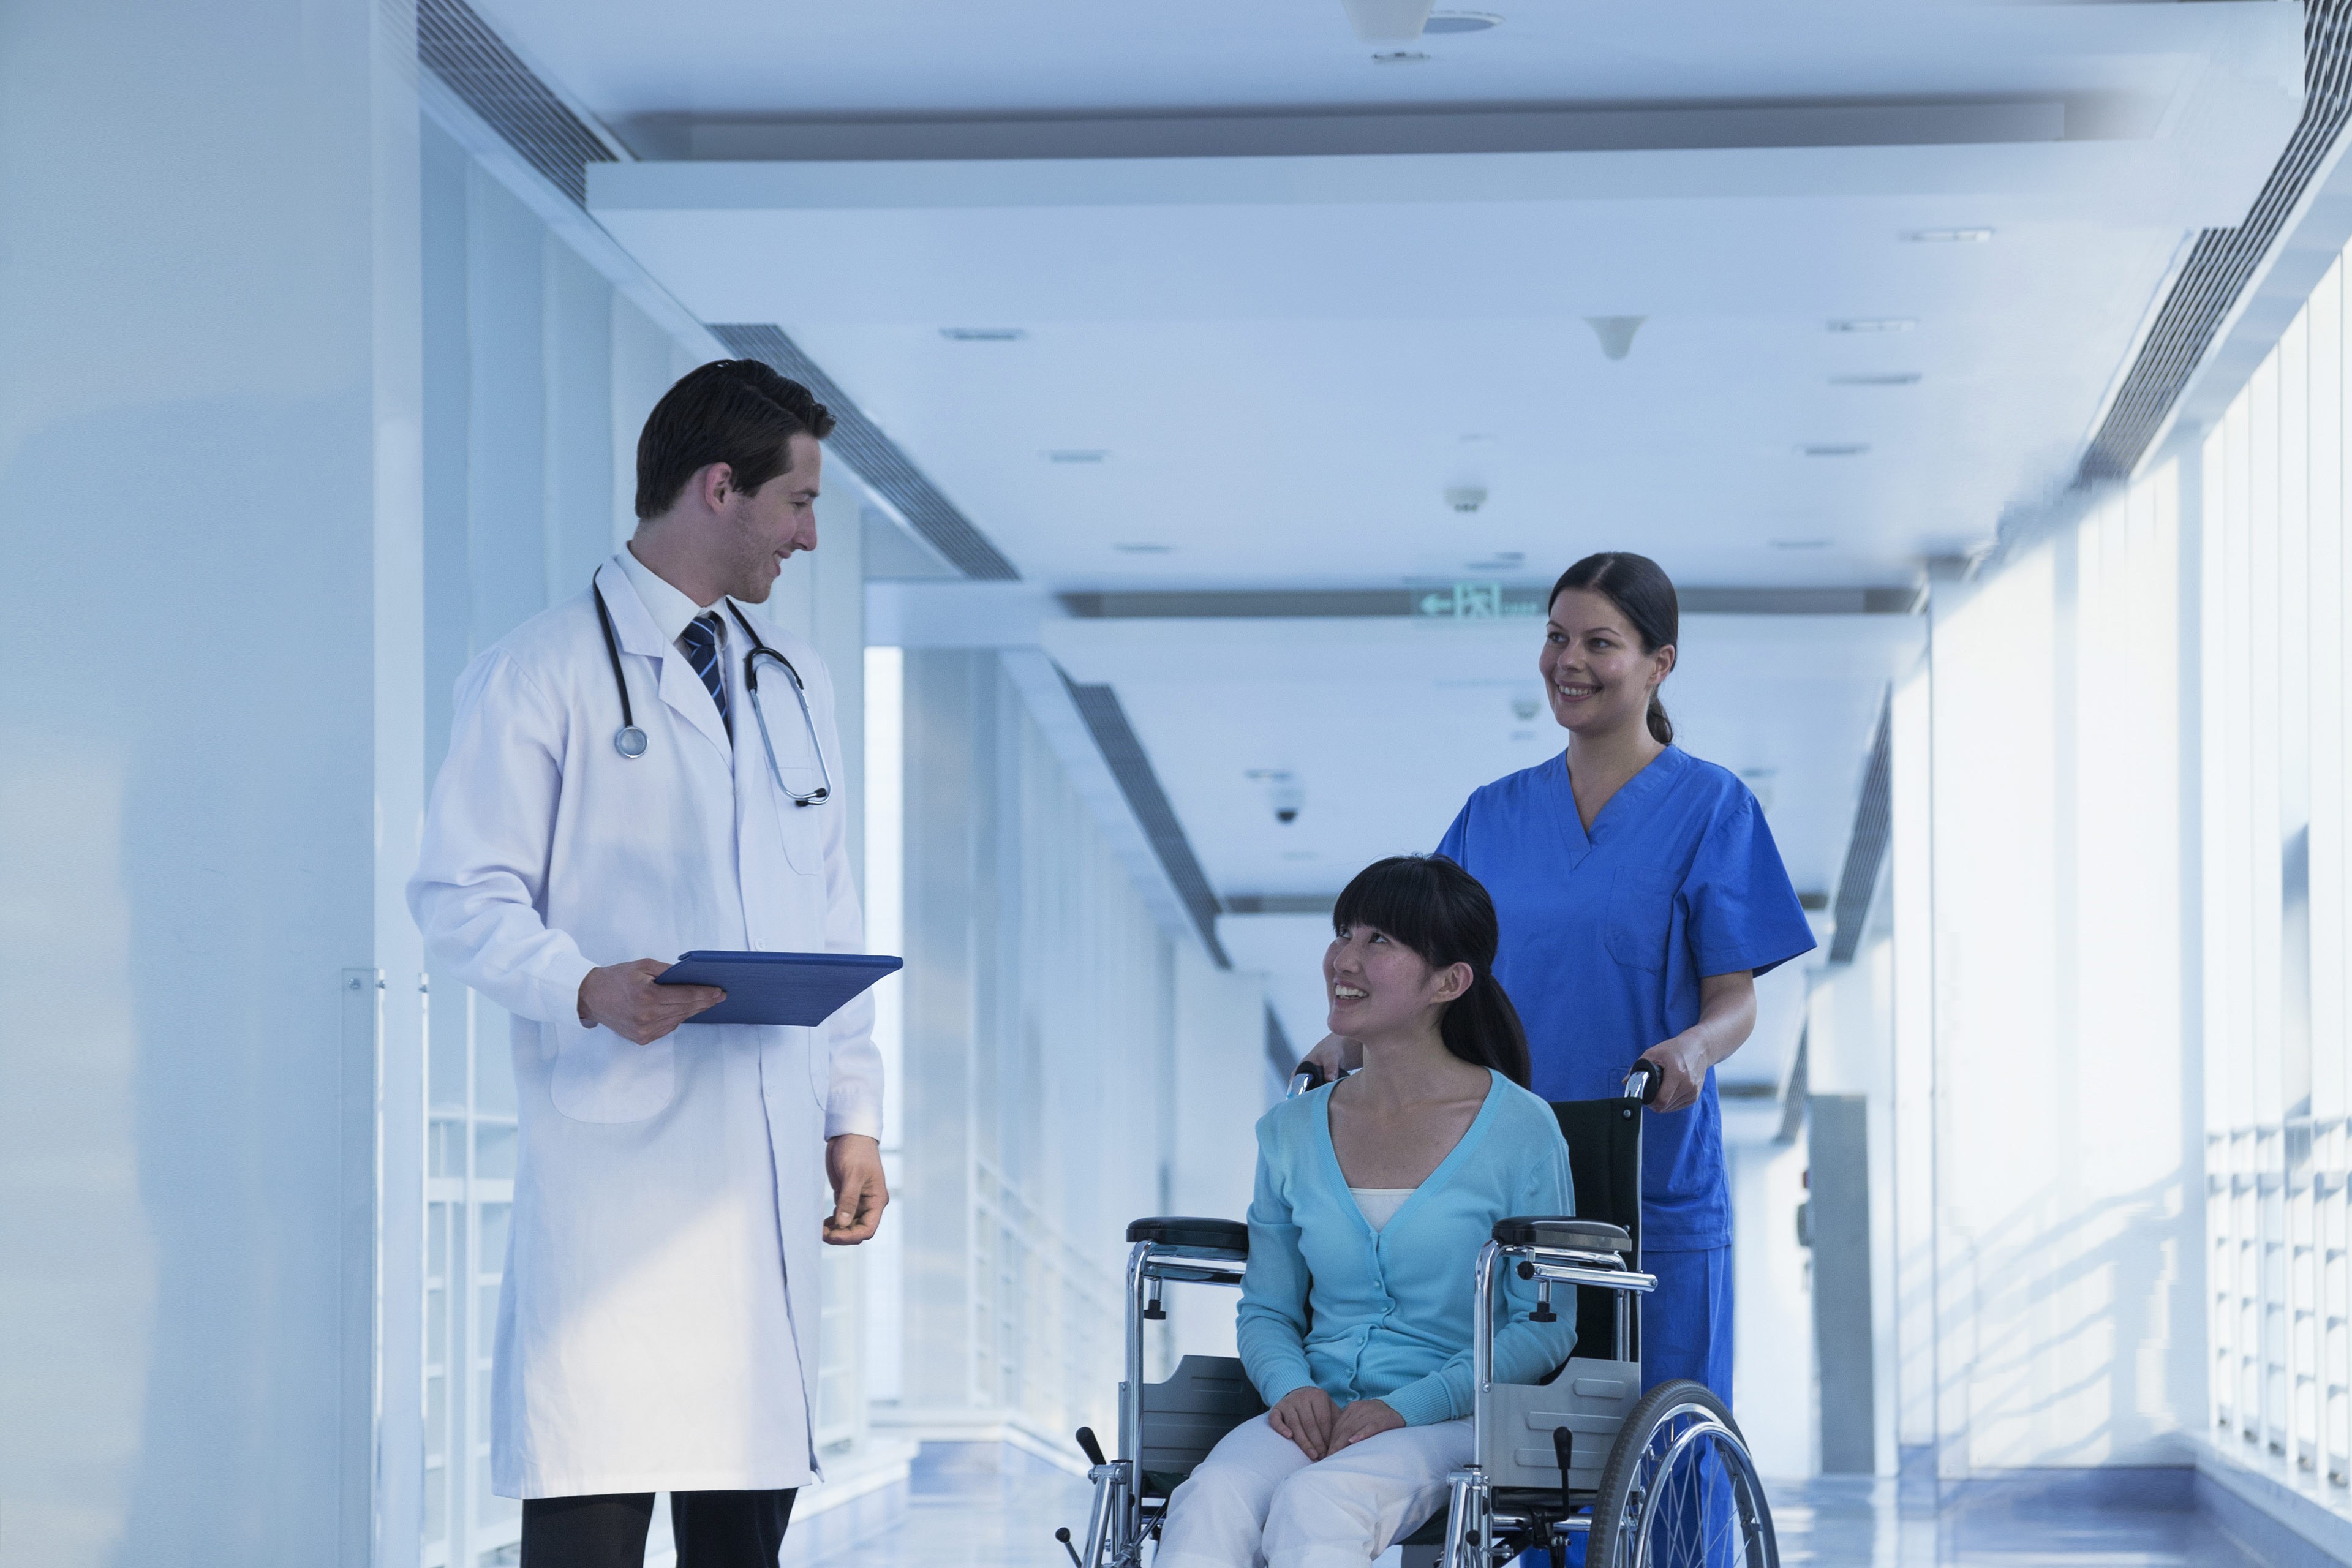 Nurse pushing patient in wheelchair talking to doctor